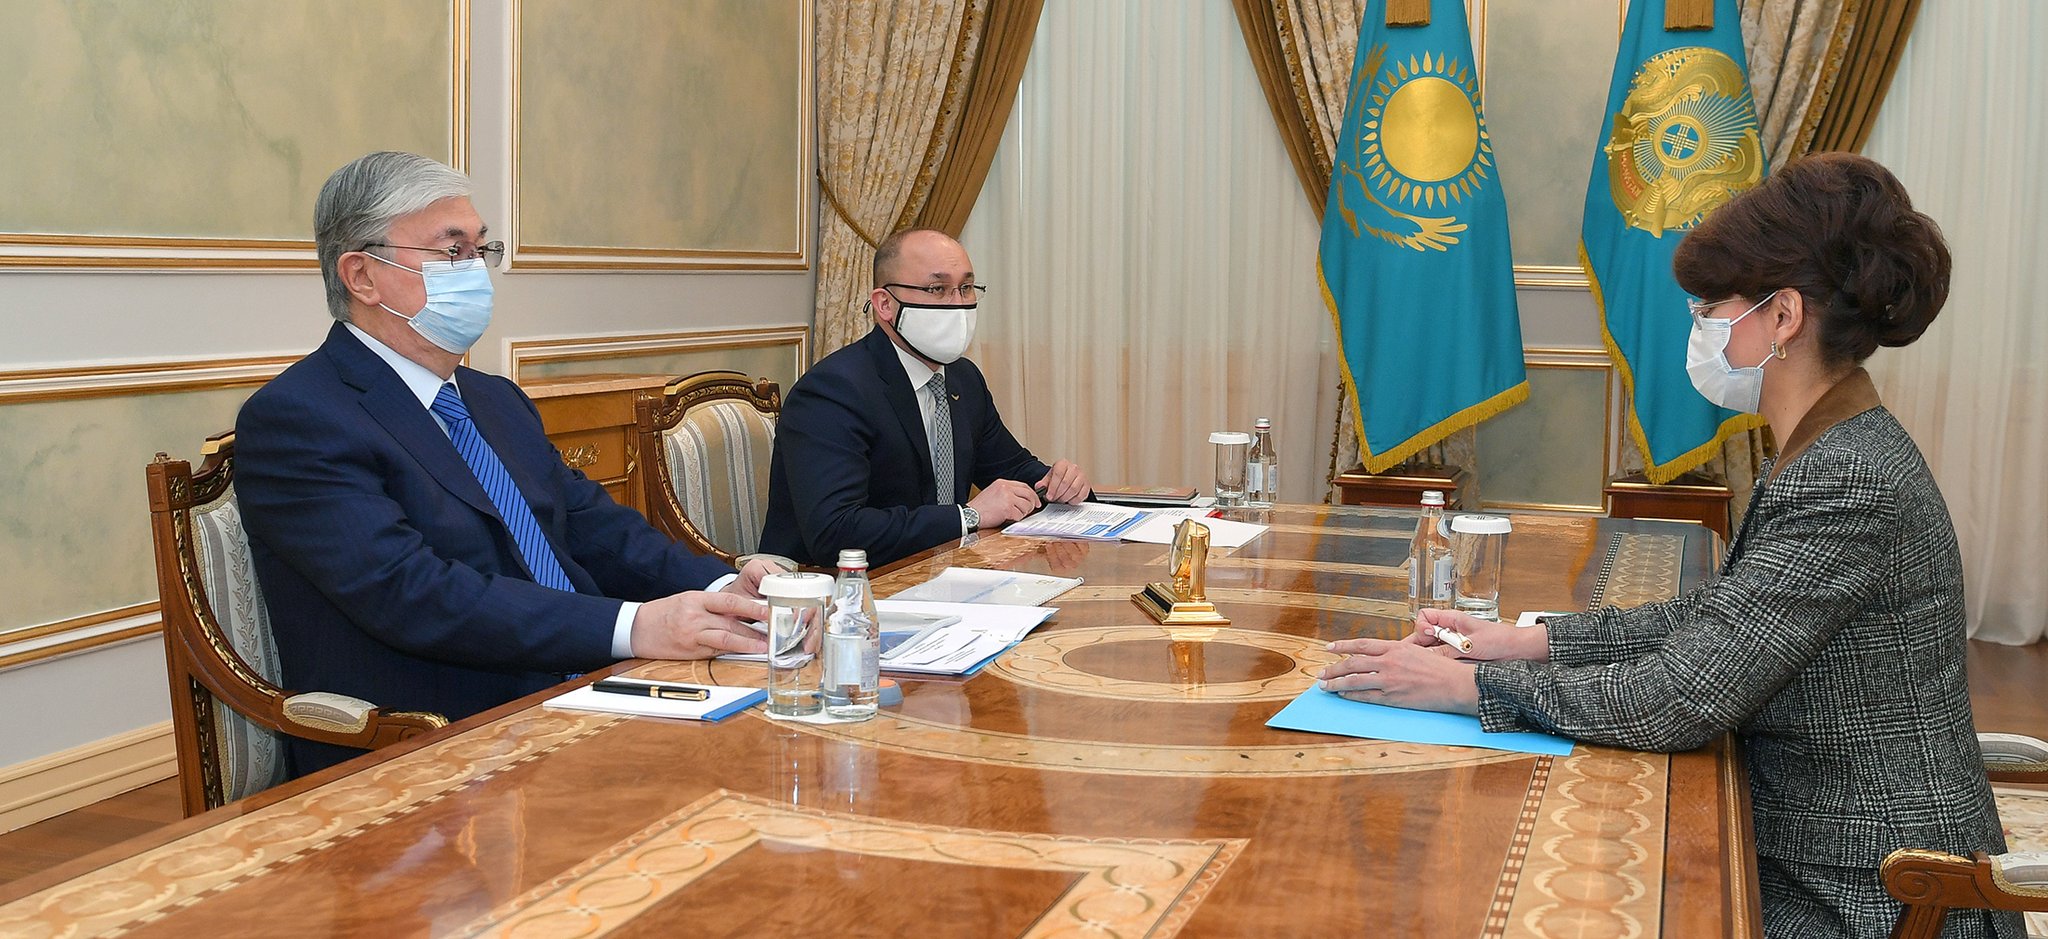 The Head of State receives Minister of Information and Public Development